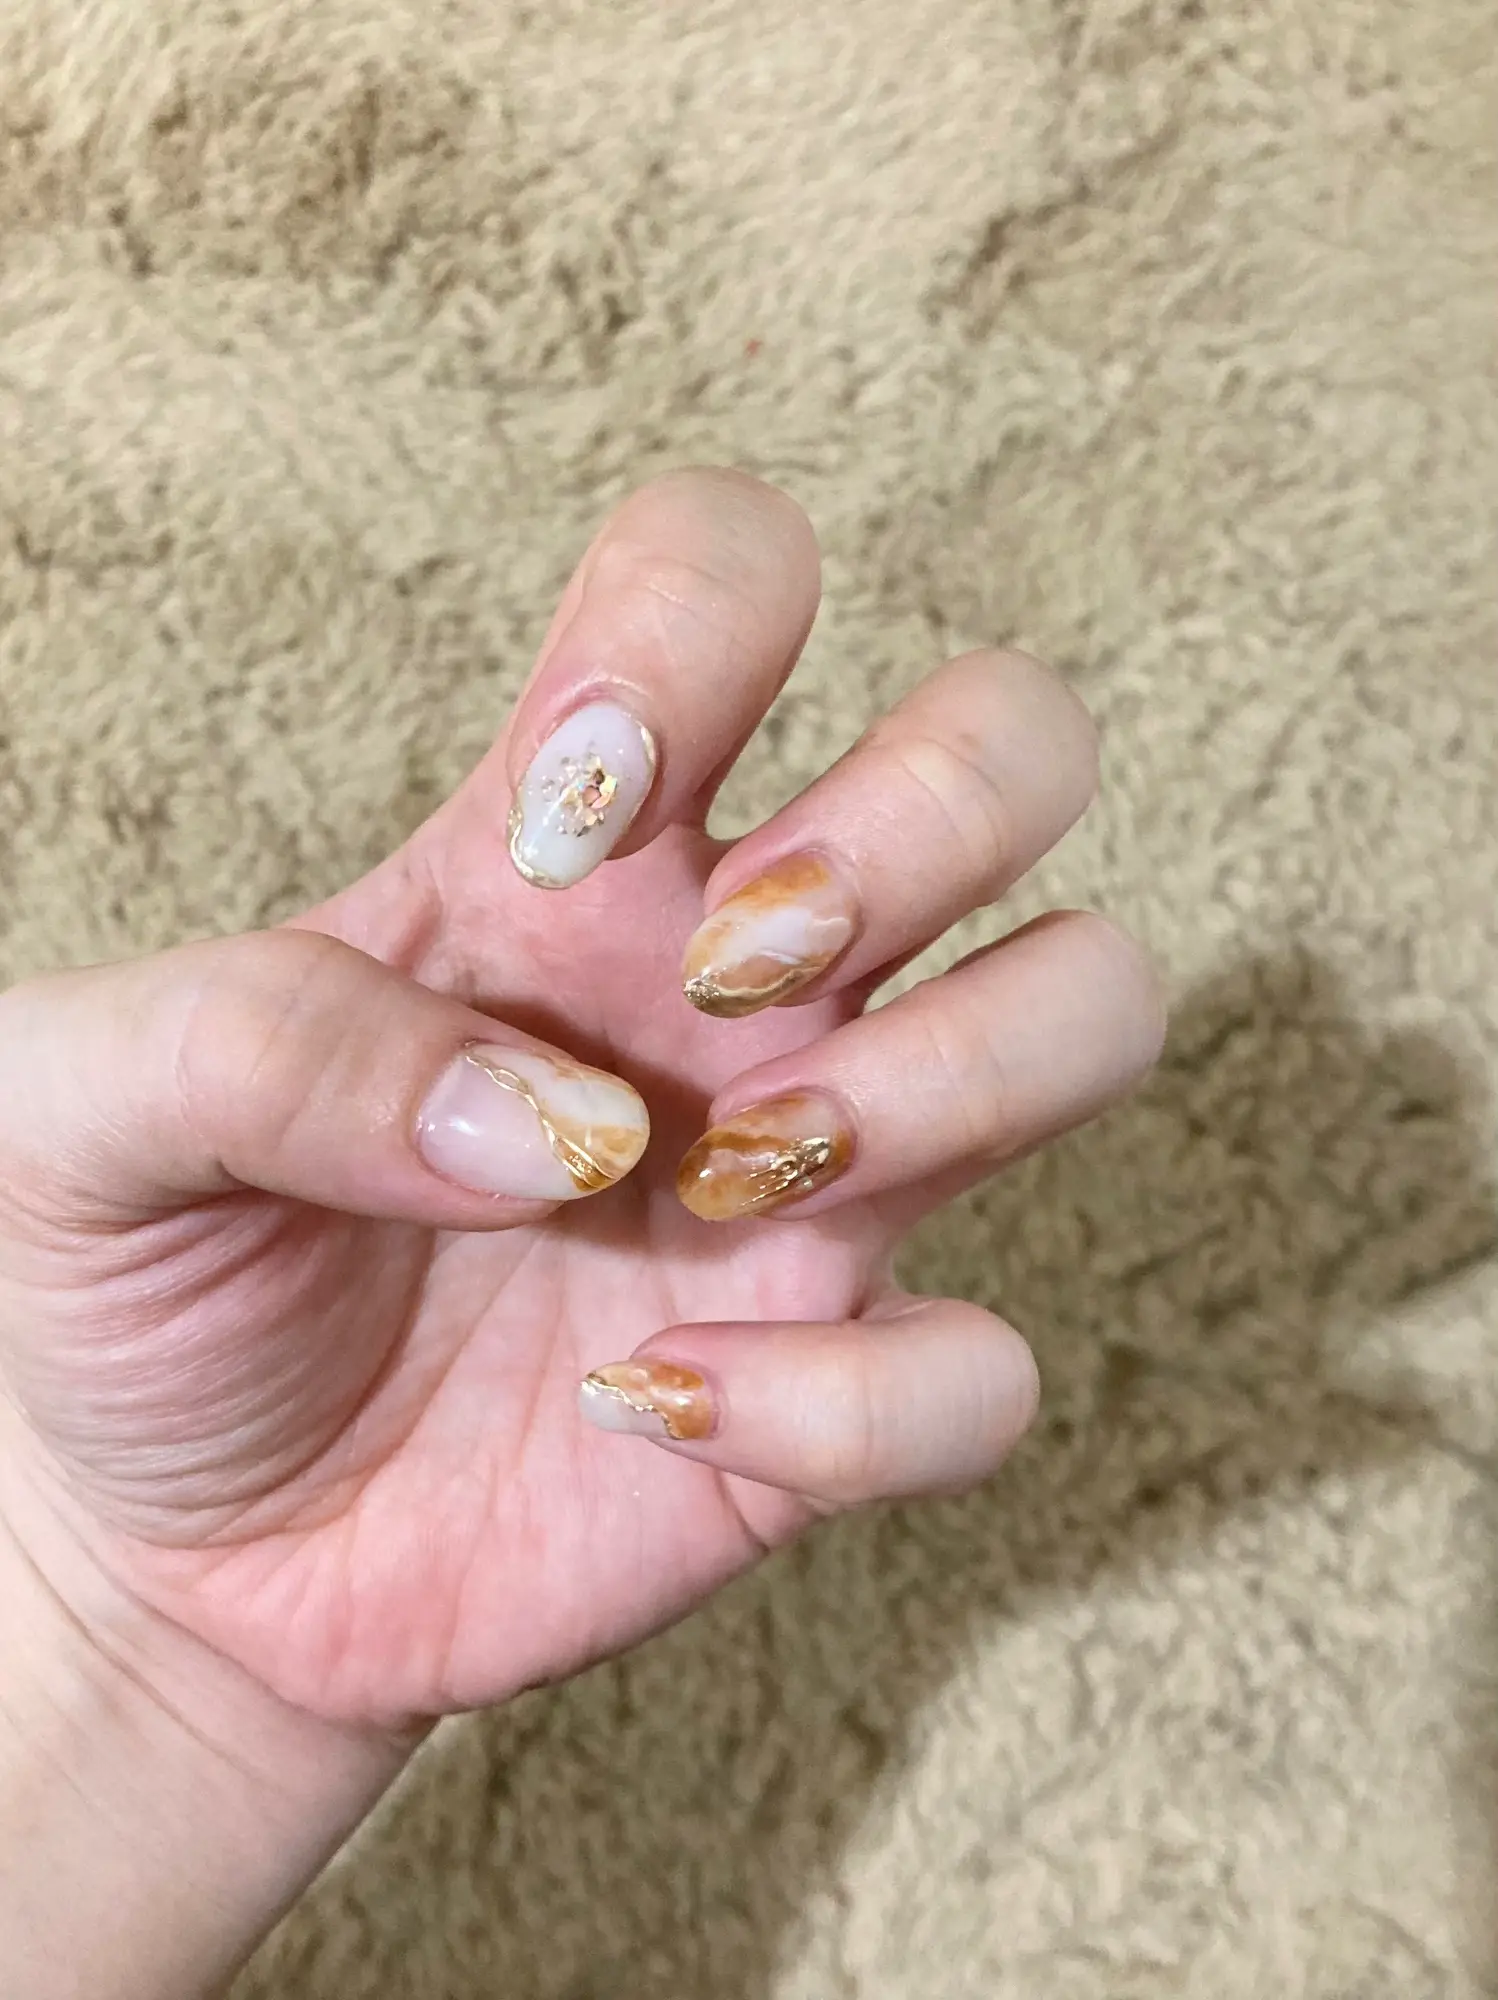 Marble effect with blooming gel and gold foil, took hours but I